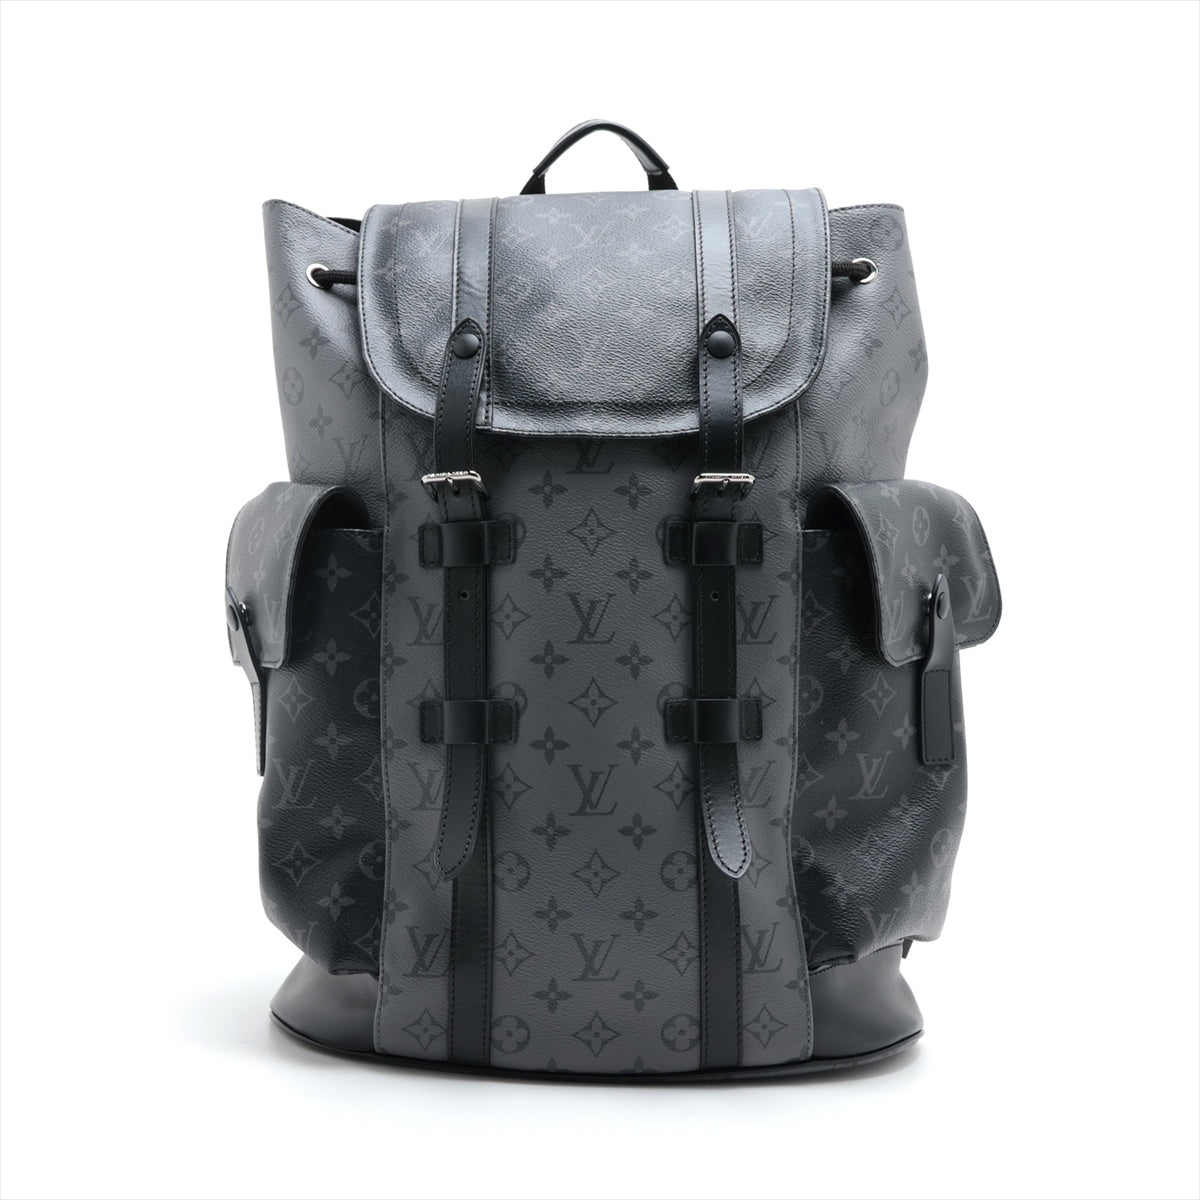 Louis Vuitton Monogram Eclipse Christpher PM M45419 There was an RFID response